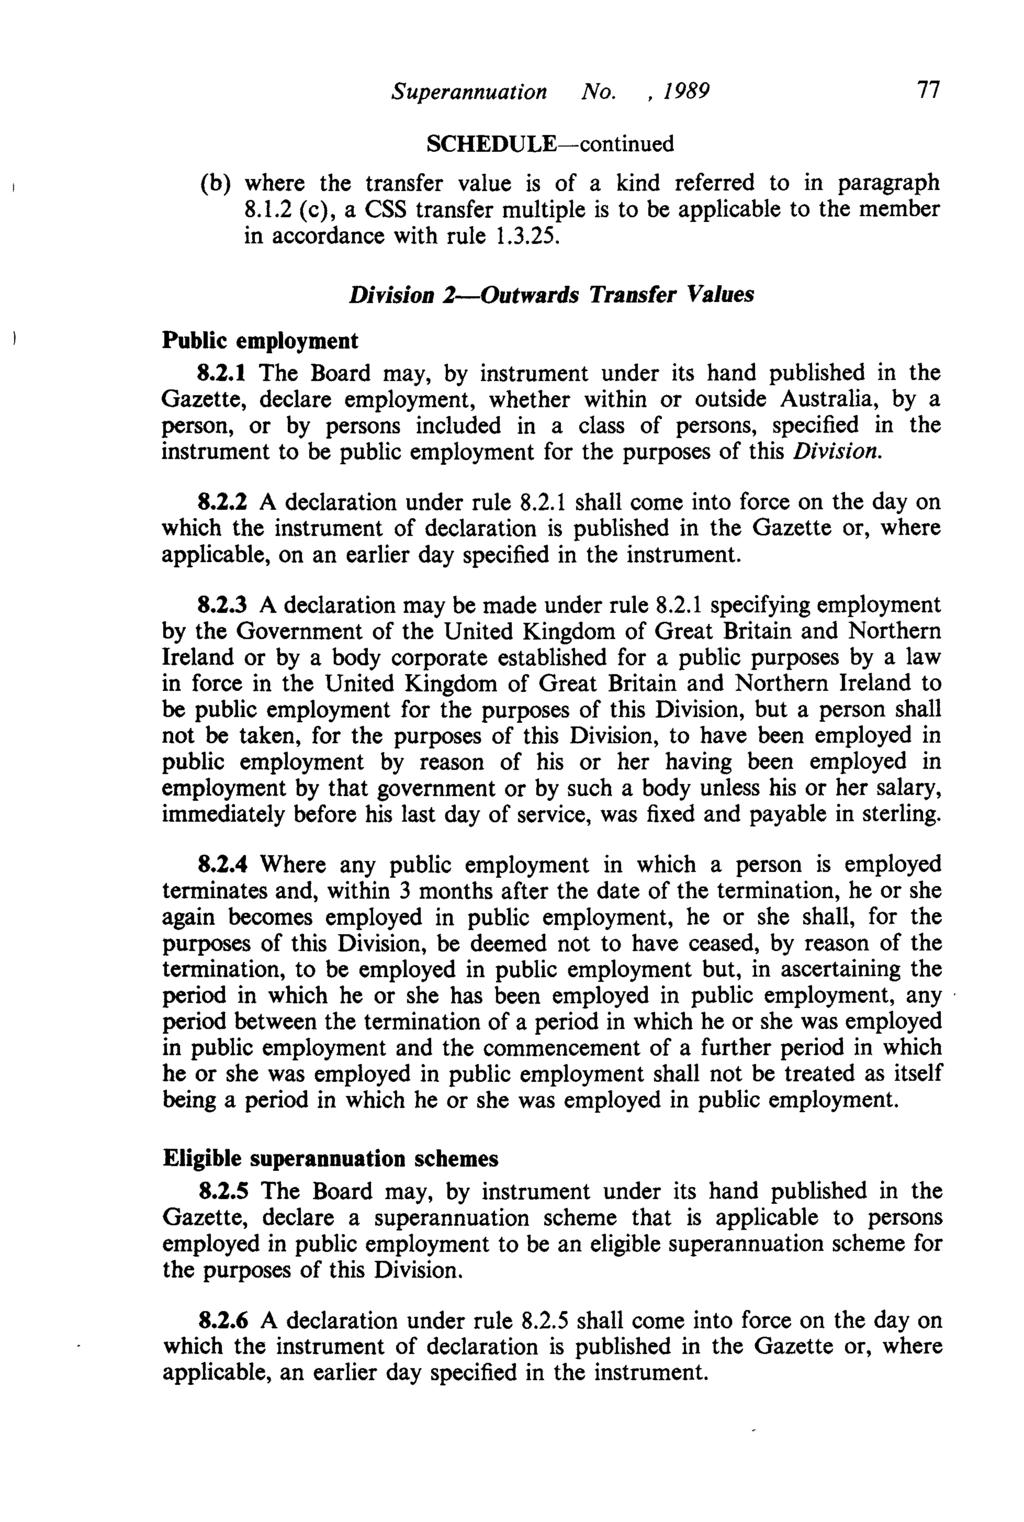 Superannuation No.,1989 77 (b) where the transfer value is of a kind referred to in paragraph 8.1.2 (c), a CSS transfer multiple is to be applicable to the member in accordance with rule 1.3.25.